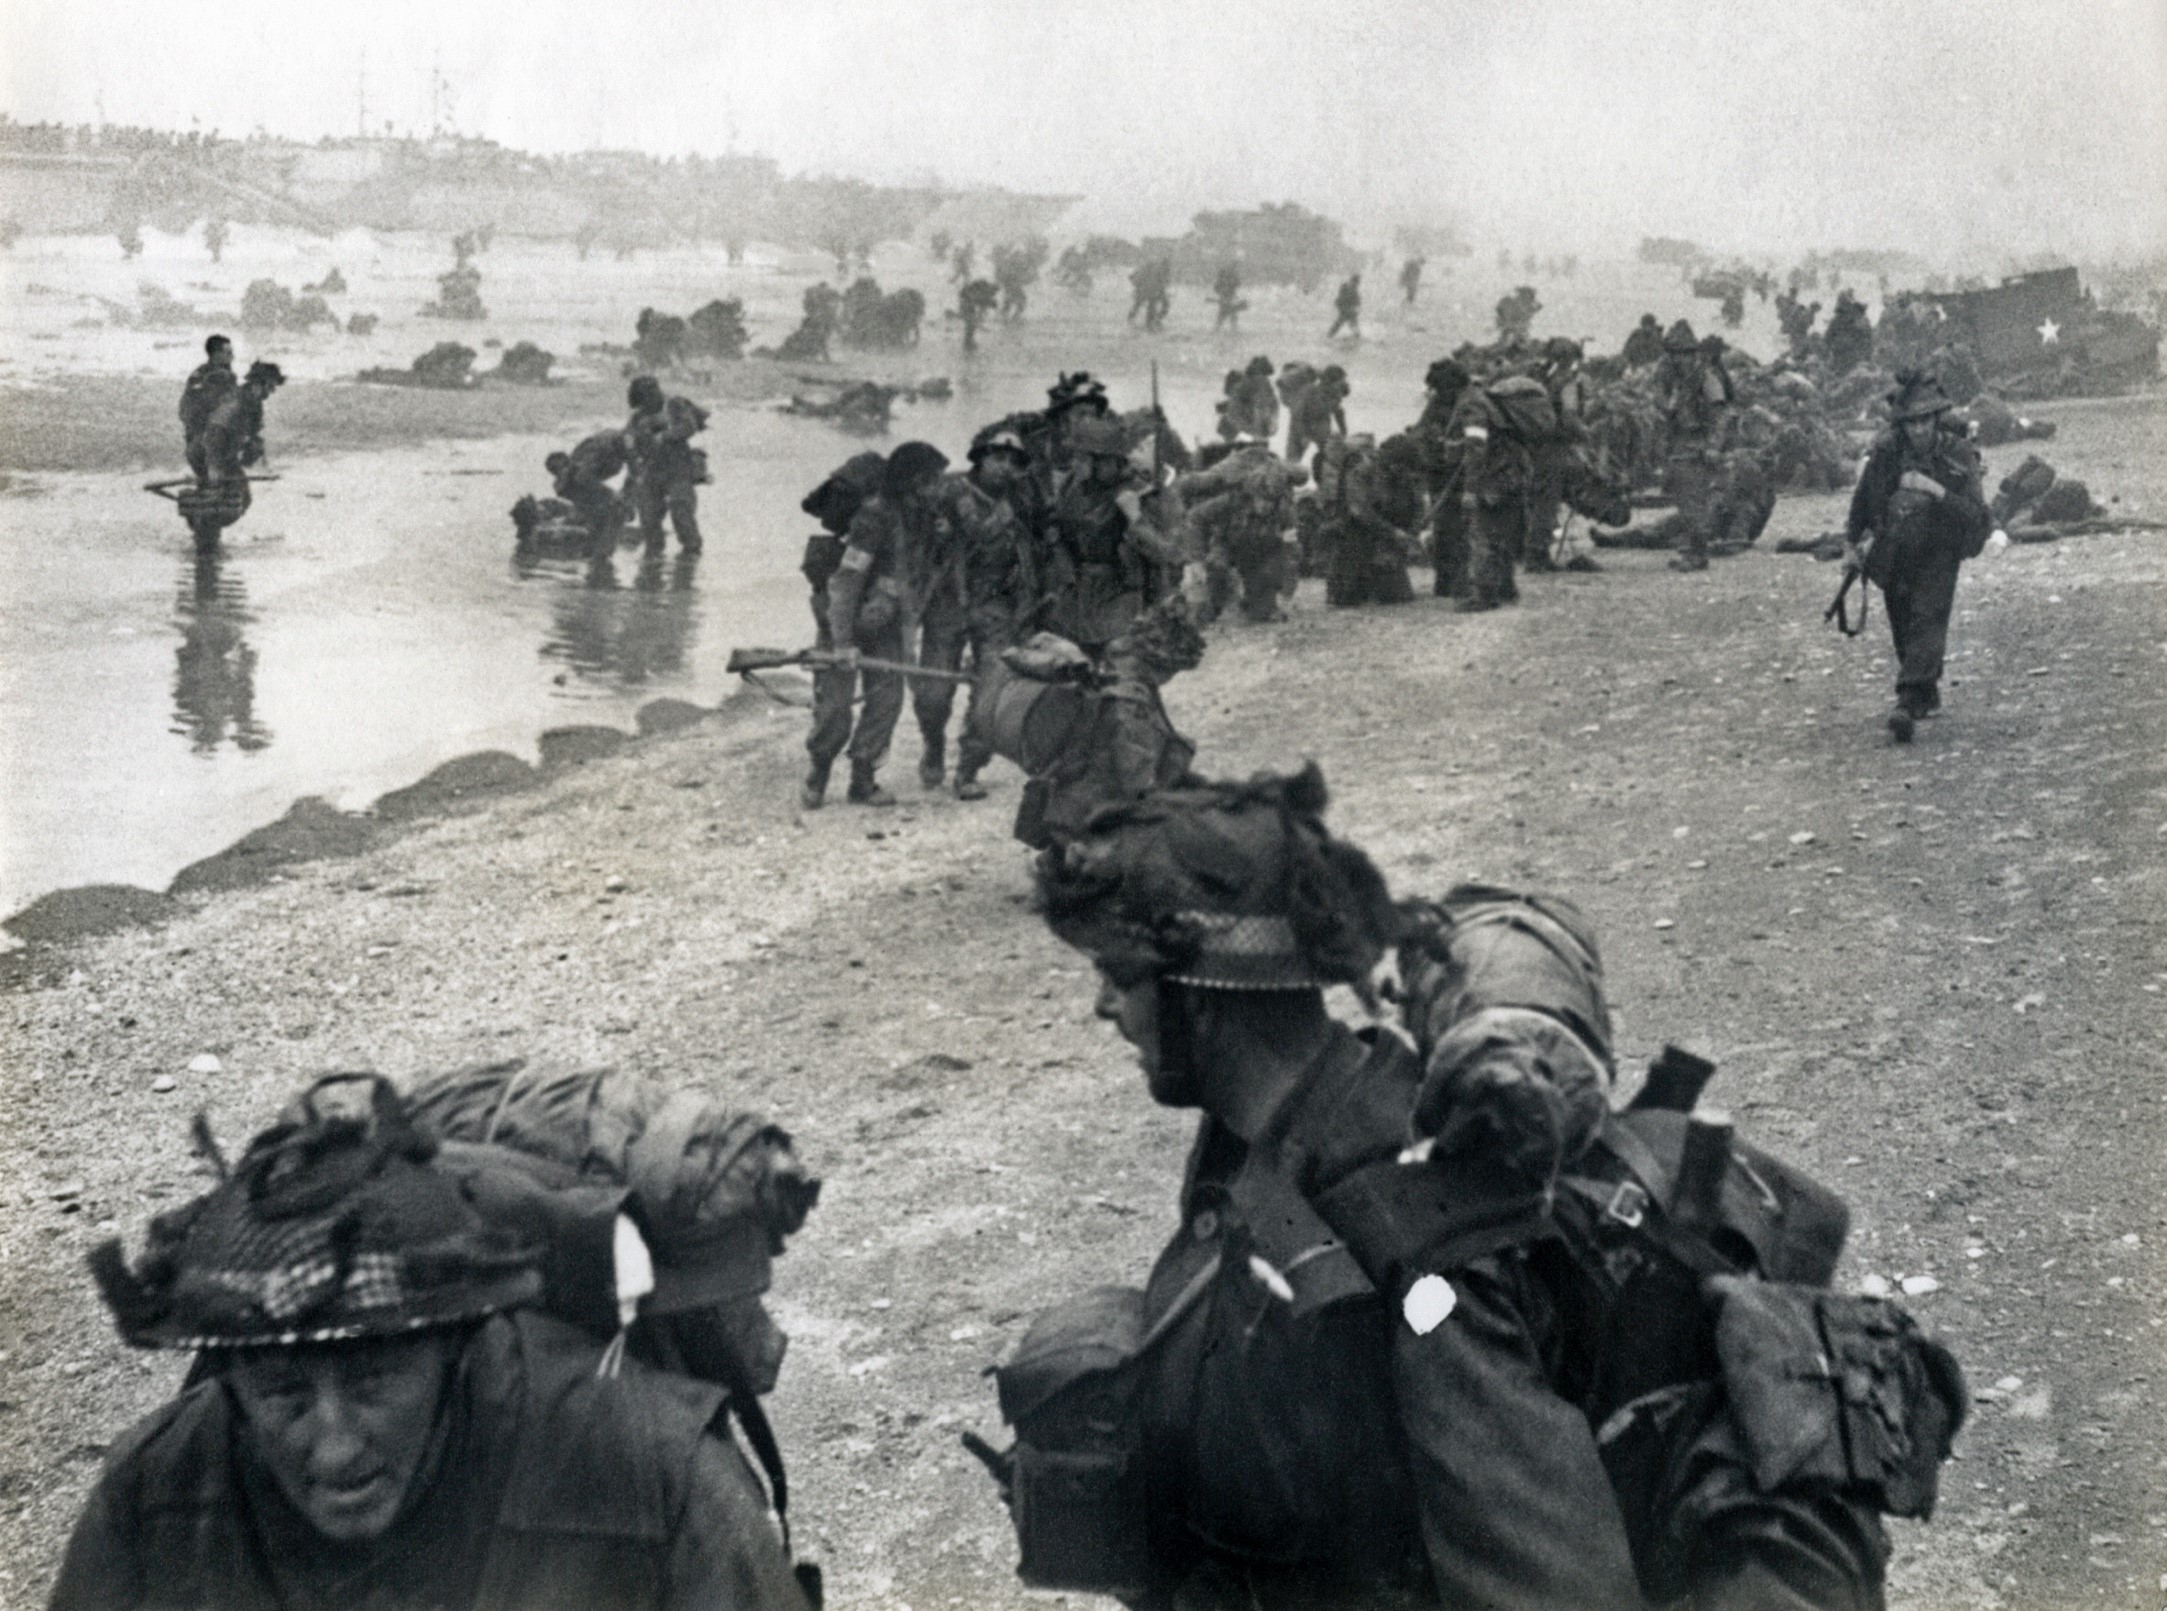 Soldiers form a line on a Normandy beach while in the background their comrades run through the sea towards them.